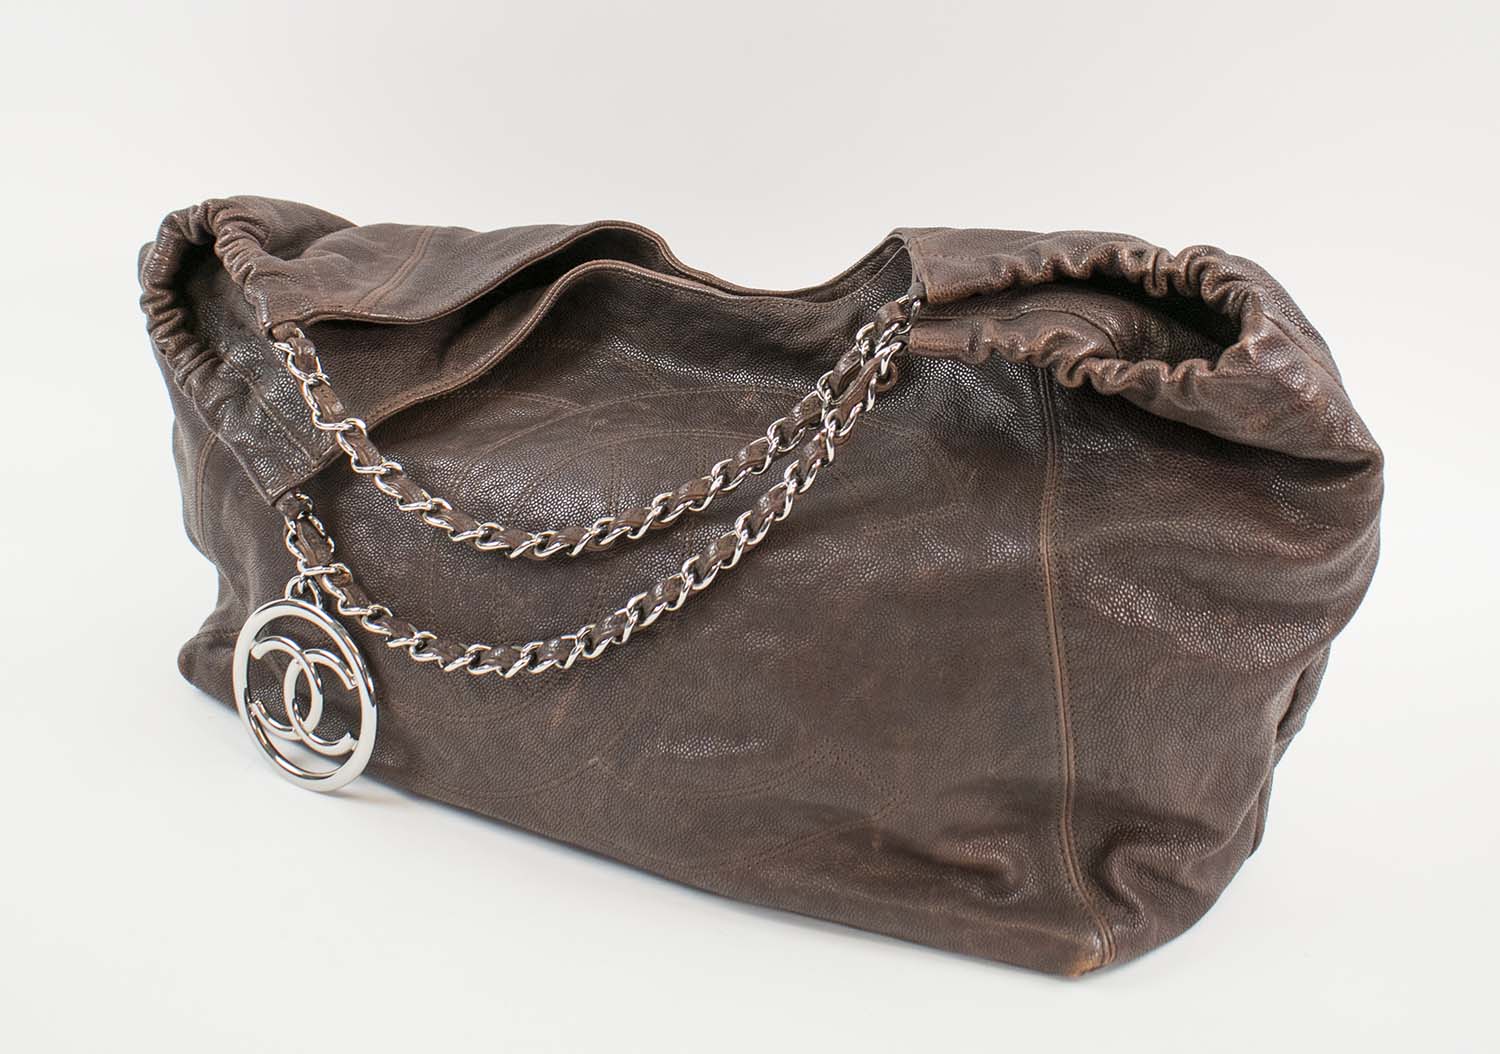 CHANEL COCO CABAS HOBO BAG, brown leather grain with silver tone charm,  leather and chain shoulder strap, logo embossed, fabric lining, inside  sticker 10896371, with inside pouch, magnetic snap closure, 45cm x